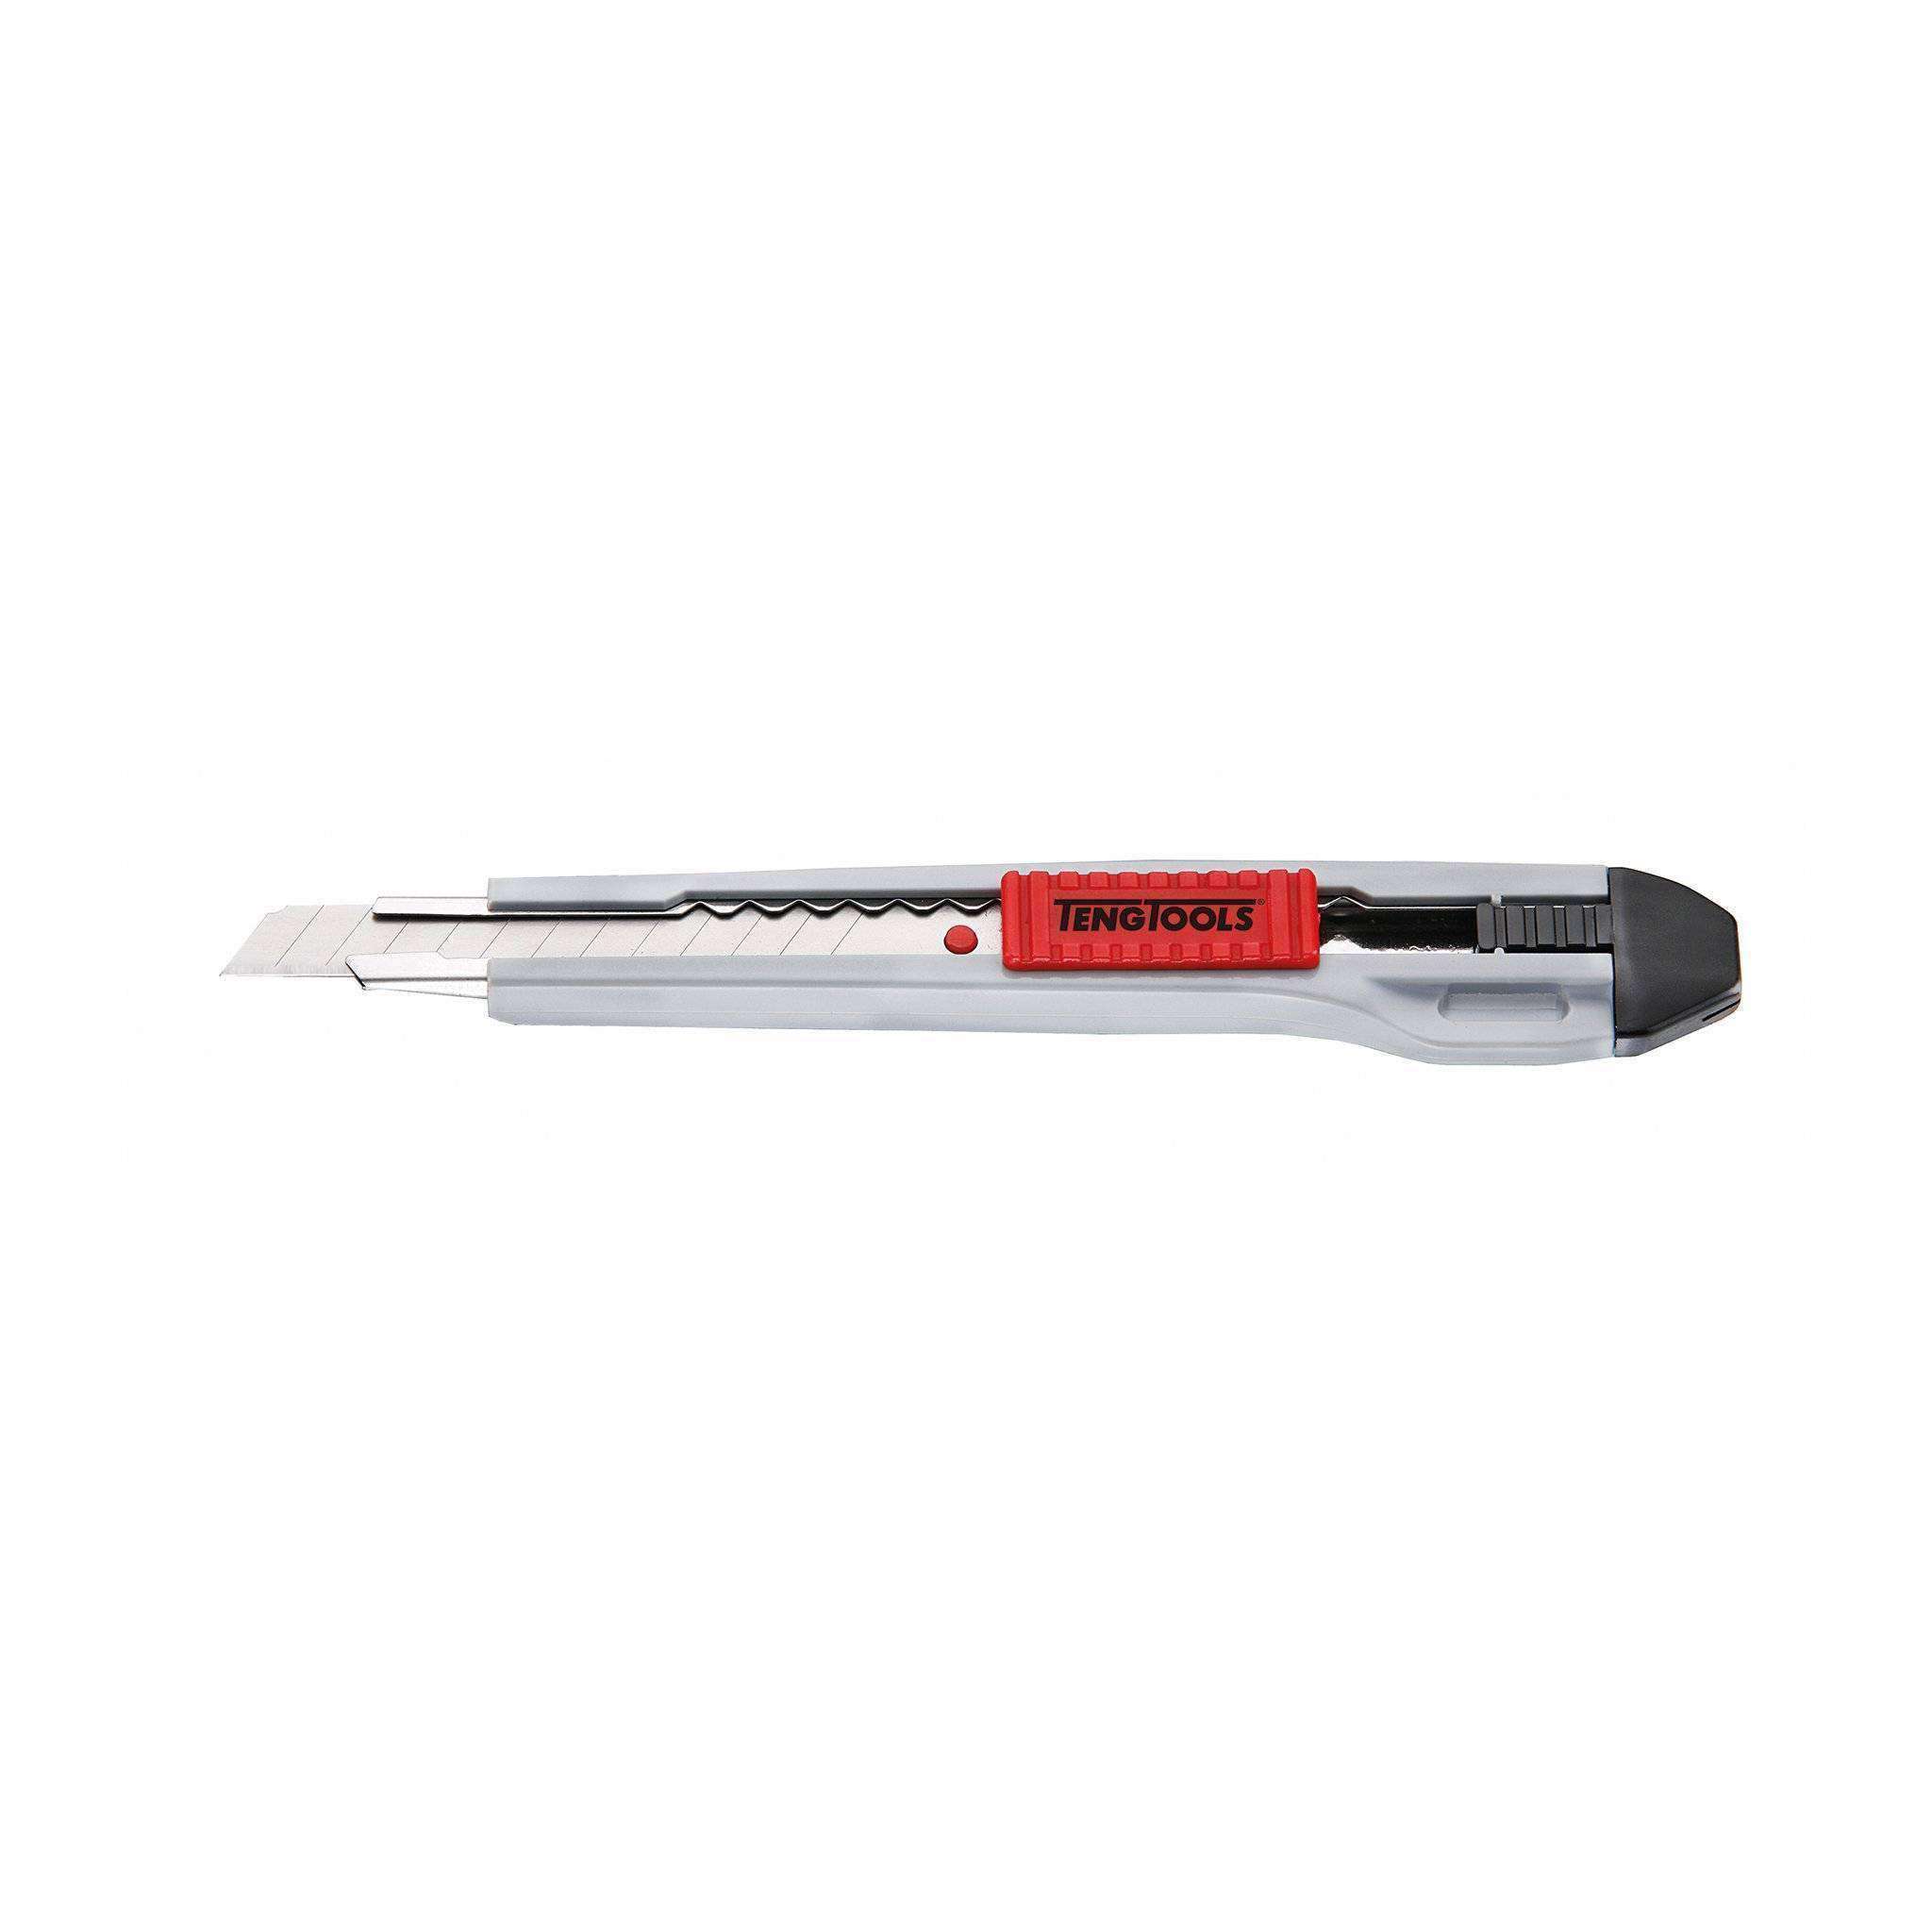 Teng Tools Hobby Knife Box Cutter With 9mm Blade - 710F